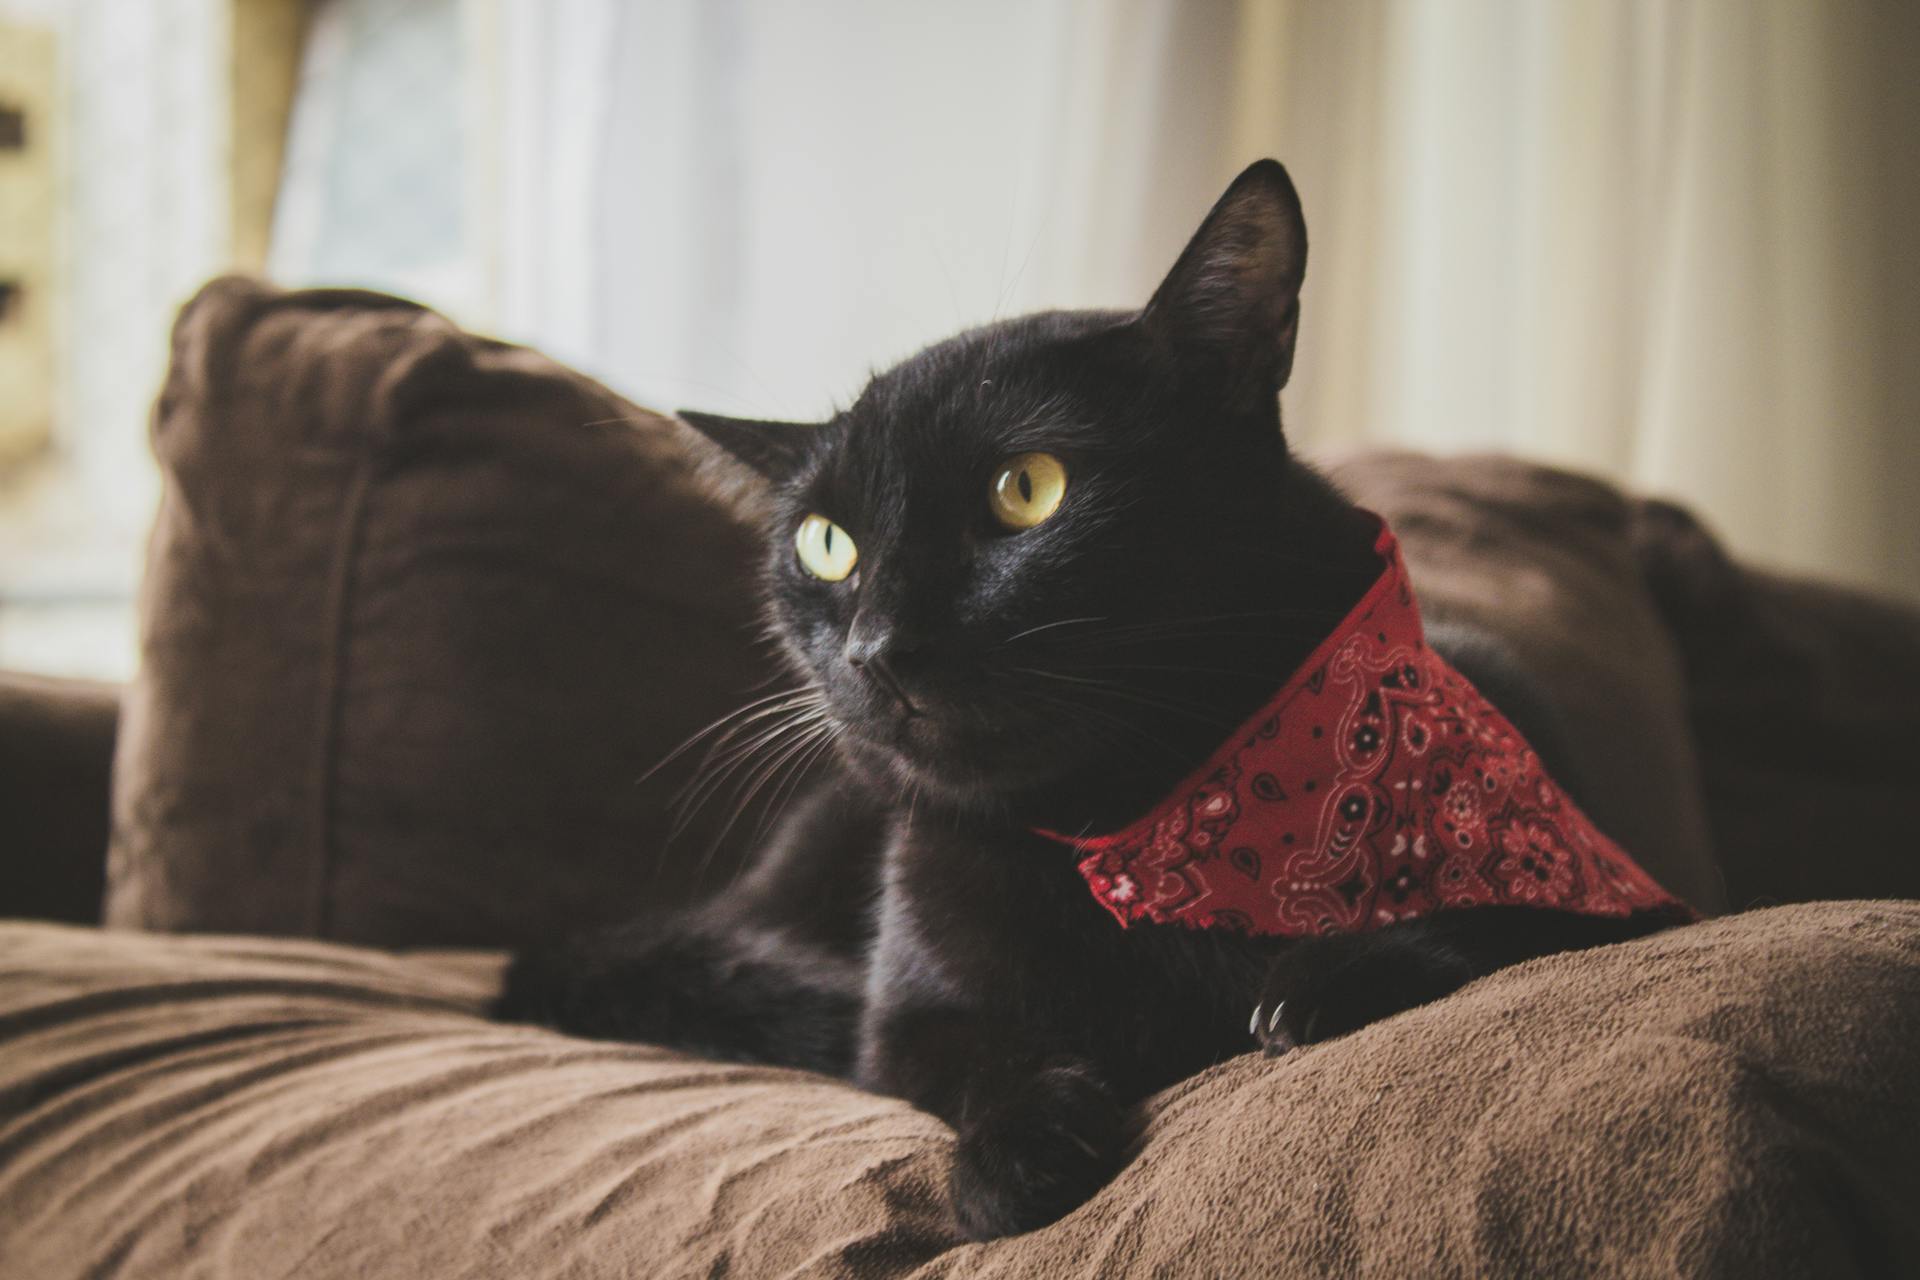 A cat wearing a bandanna sitting on a couch indoors